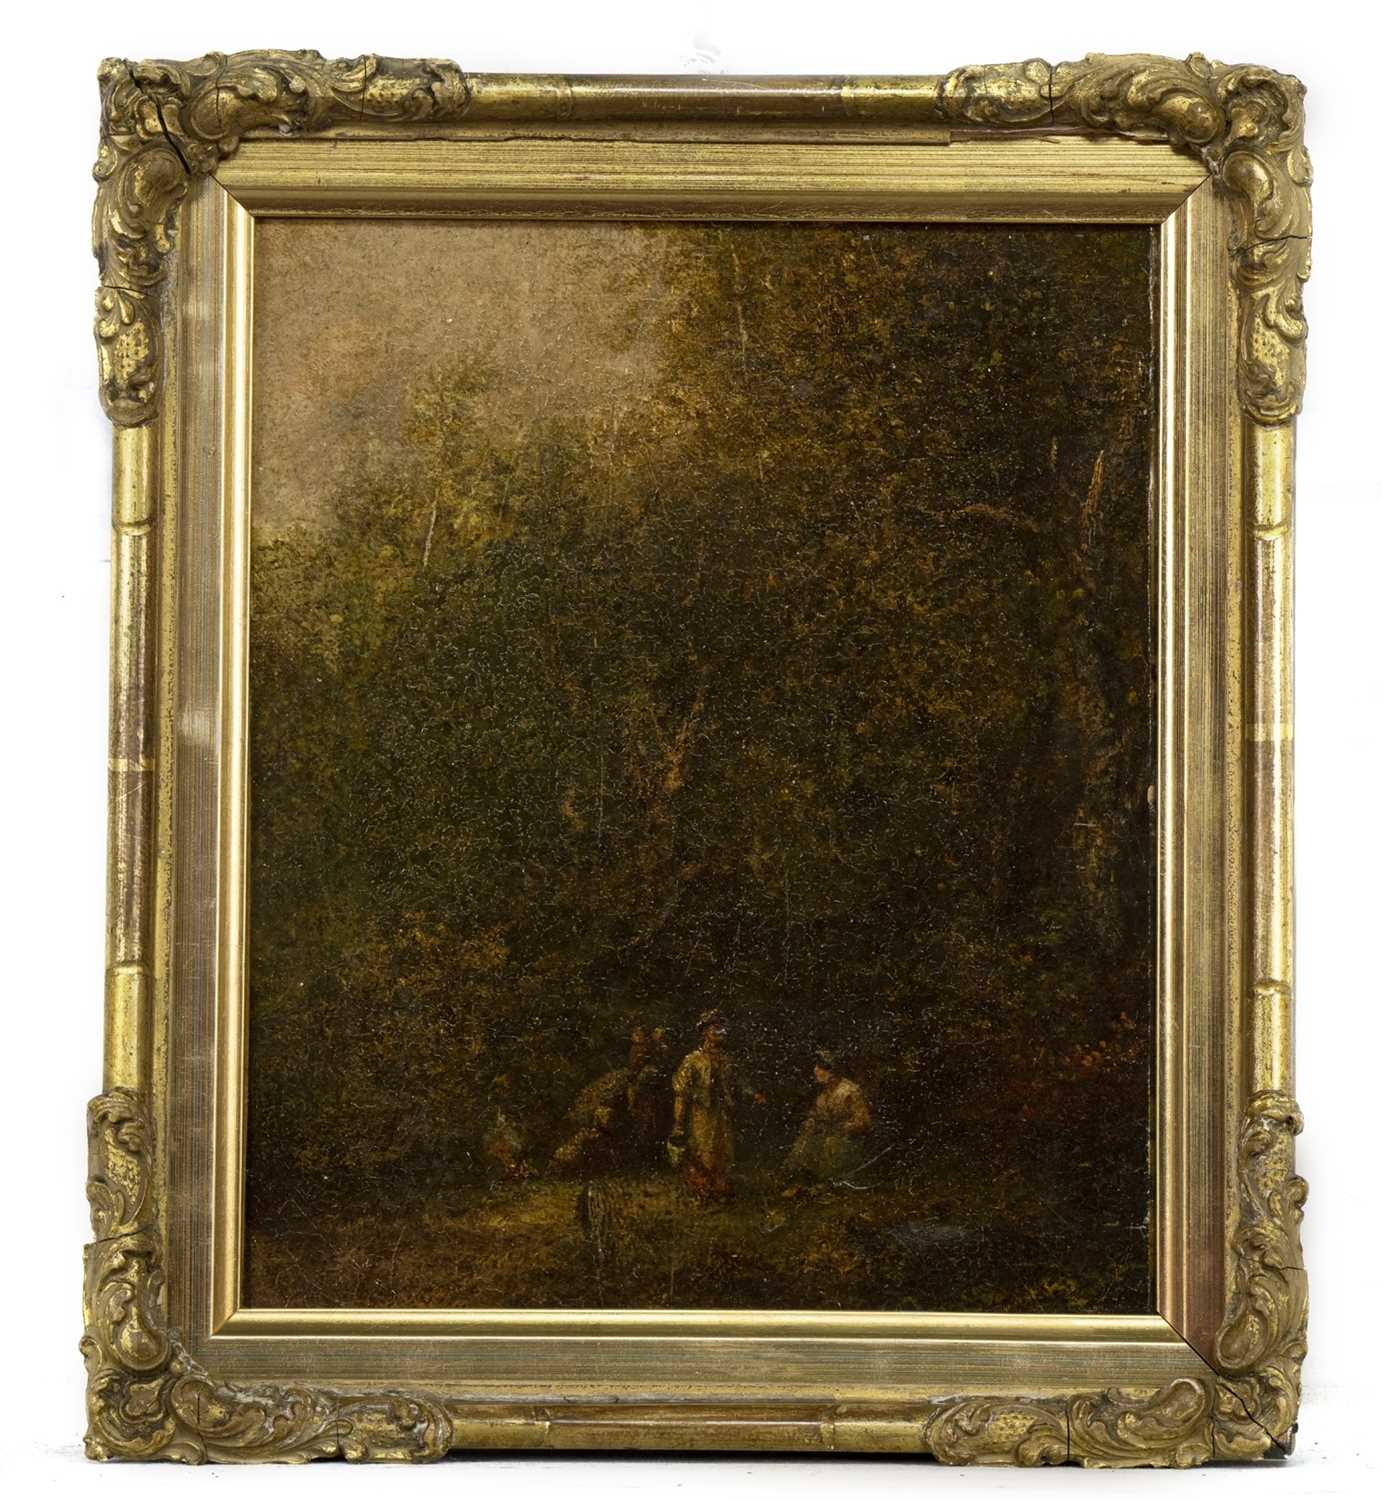 WOODED SCENE WITH FIGURES, AN OIL